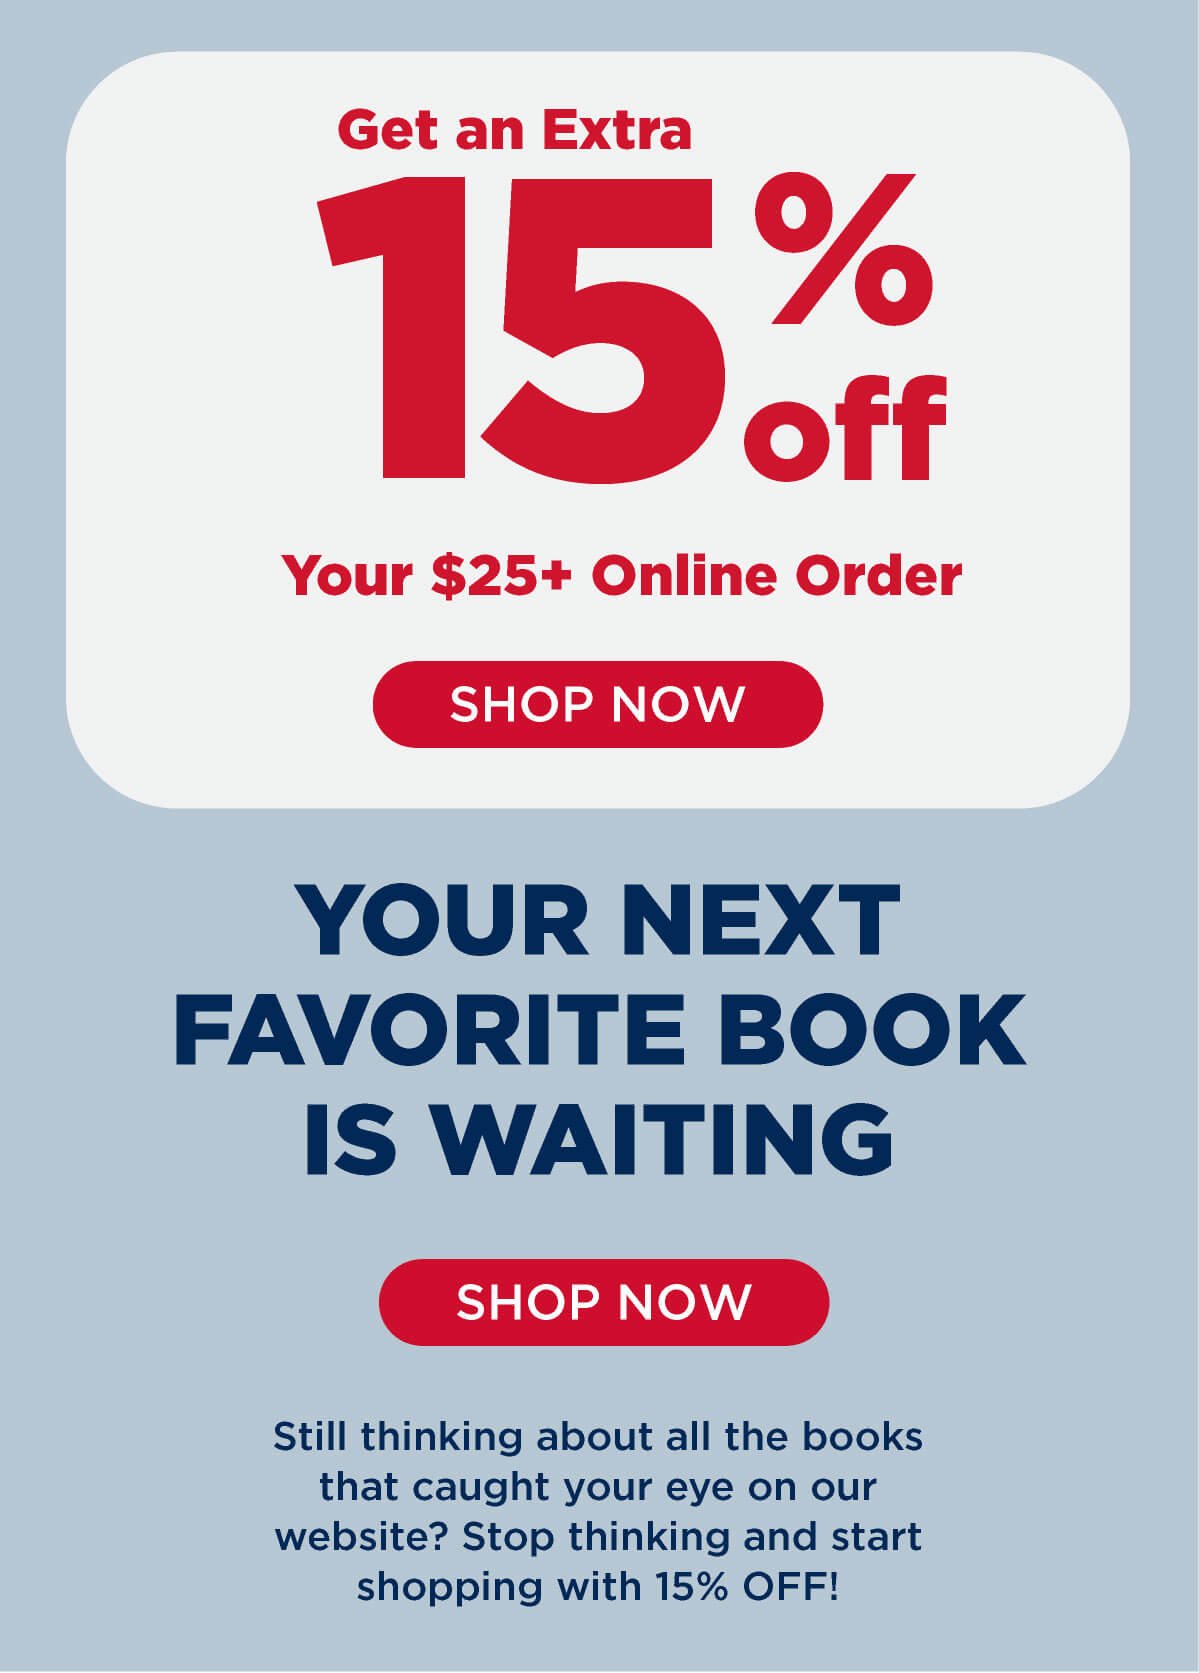 Still thinking about all the books that caught your eye on our website? Get an EXTRA 15% OFF your \\$25+ online order! Shop Now.